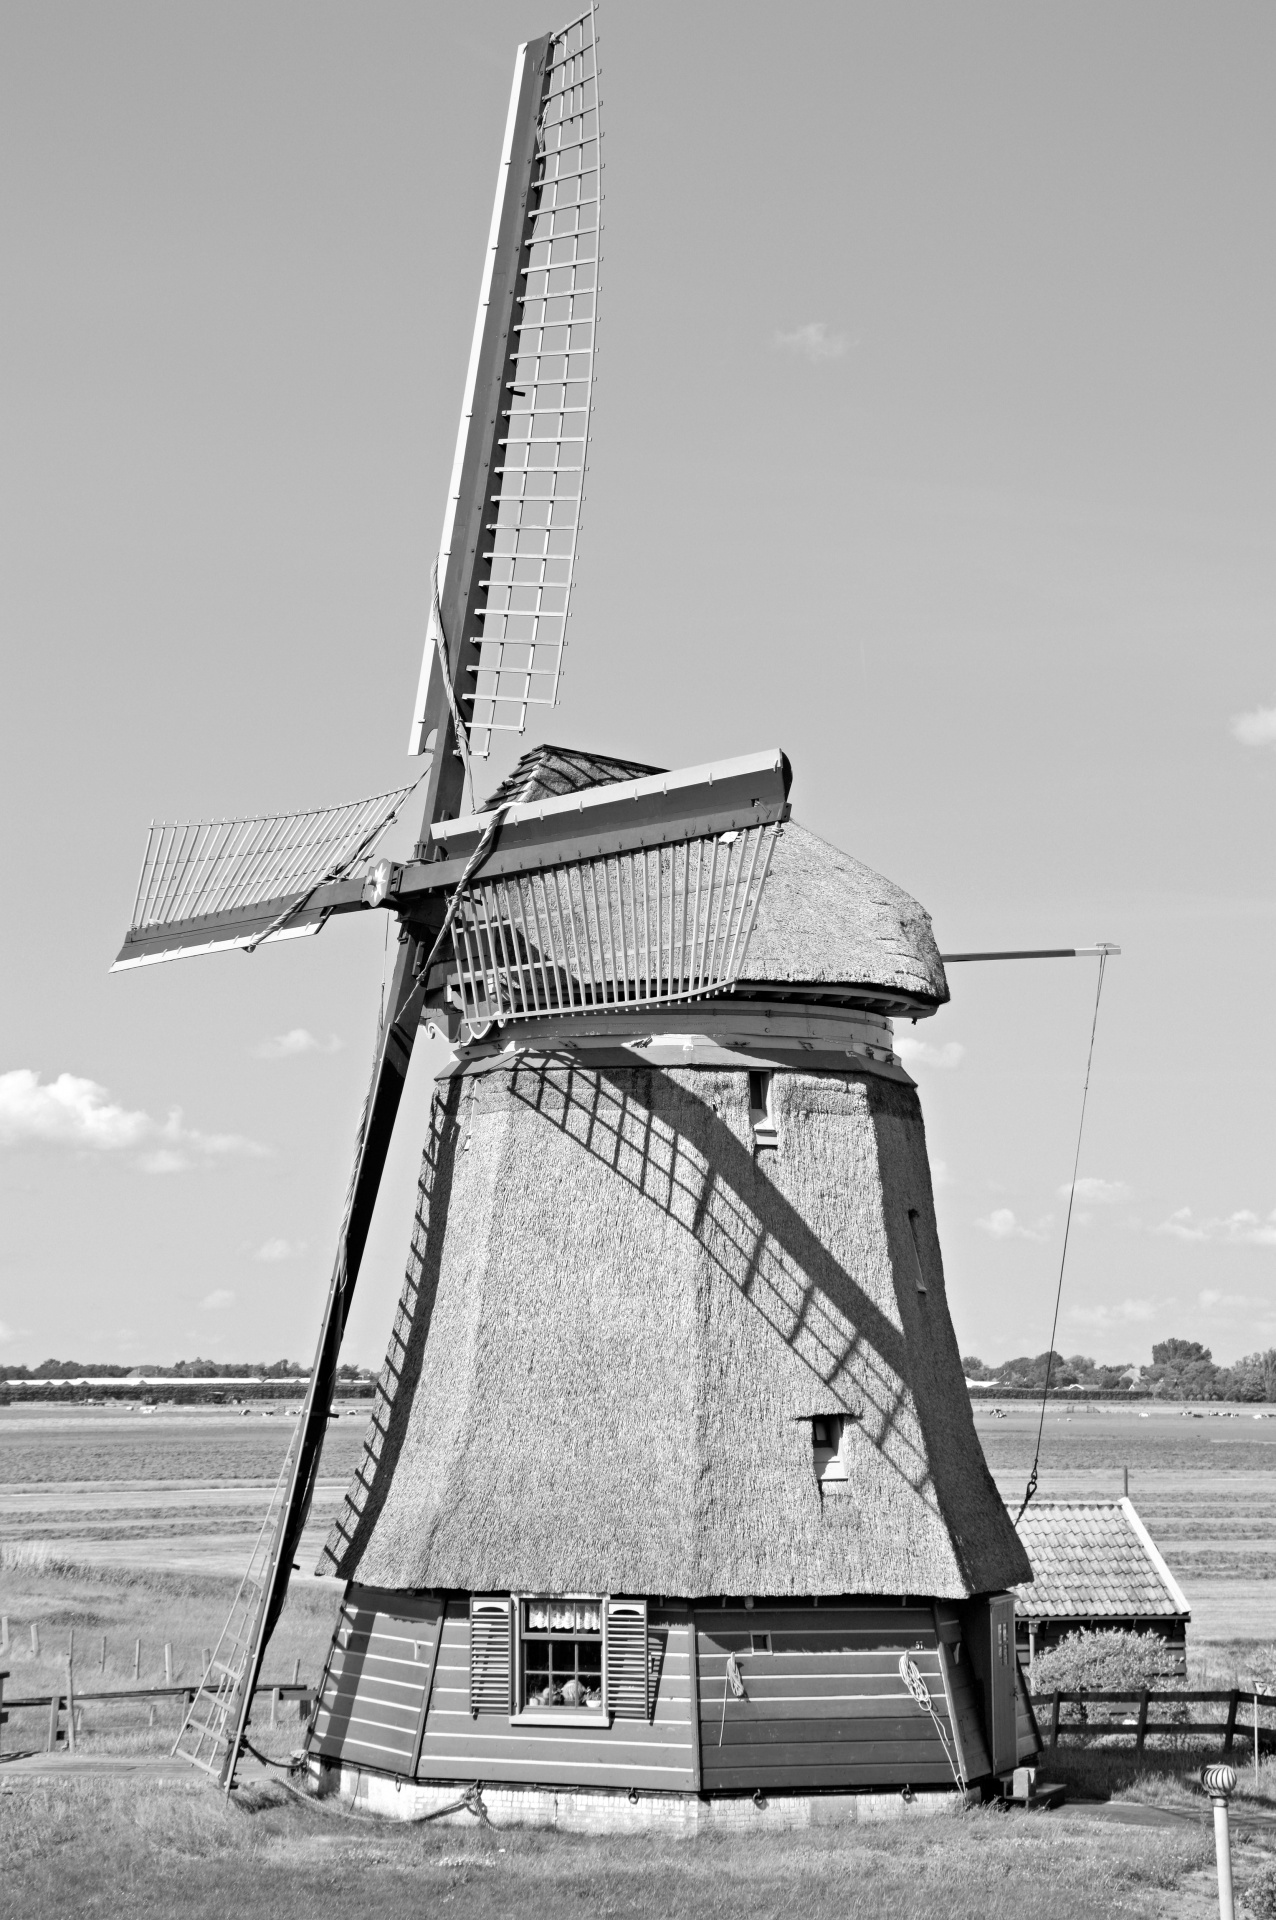 Authentic Windmill